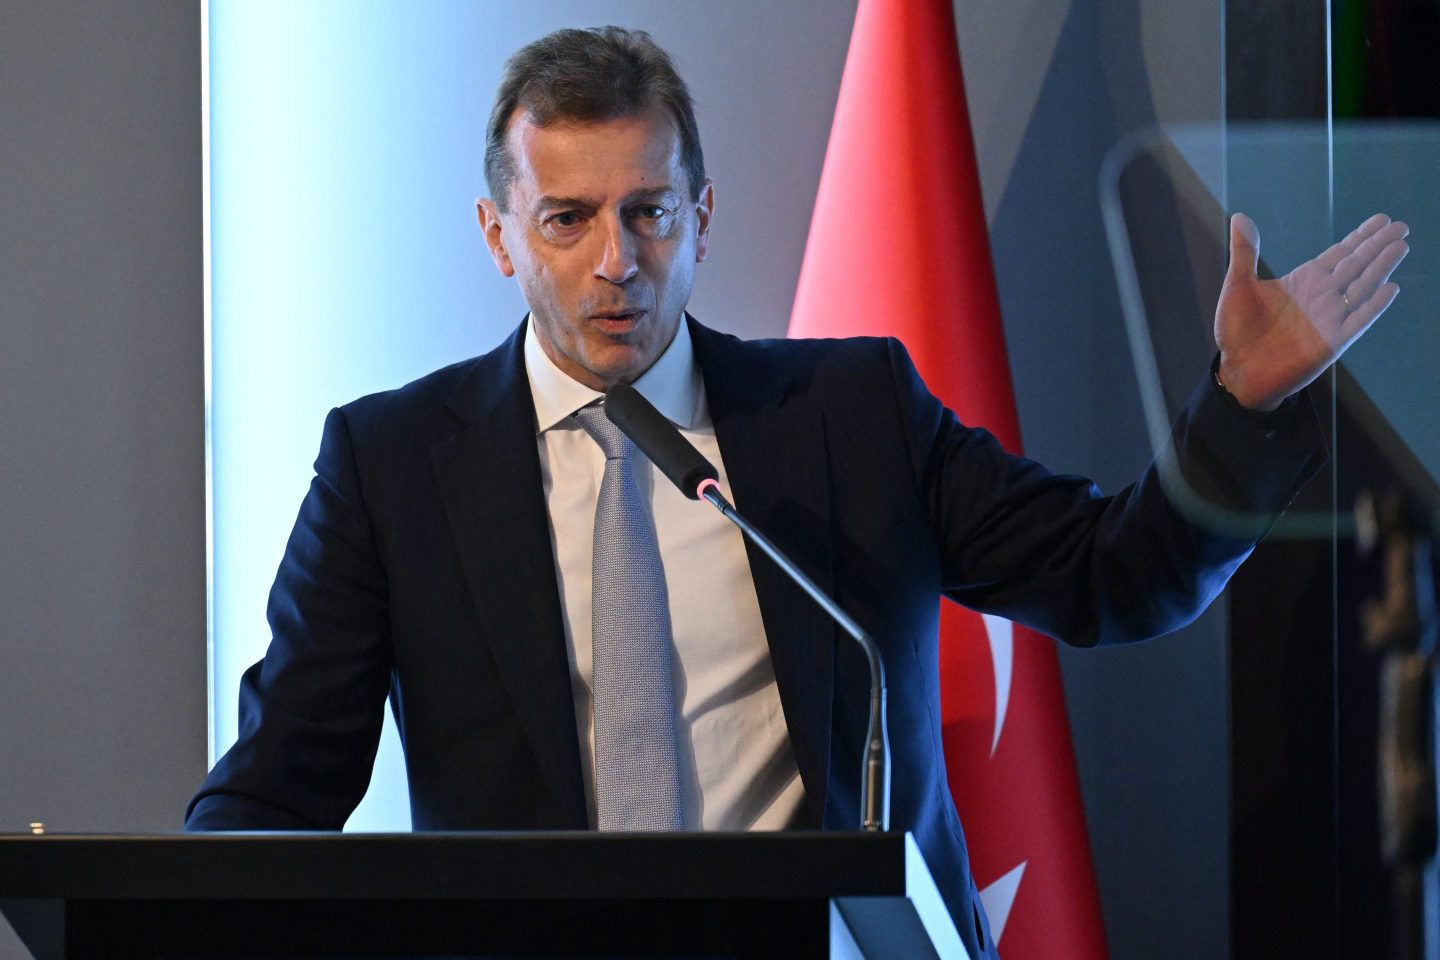 Airbus general director Guillaume Faury delivers a speech during an agreement signing cerenomy with Rolls Royce and Turkish Airlines.